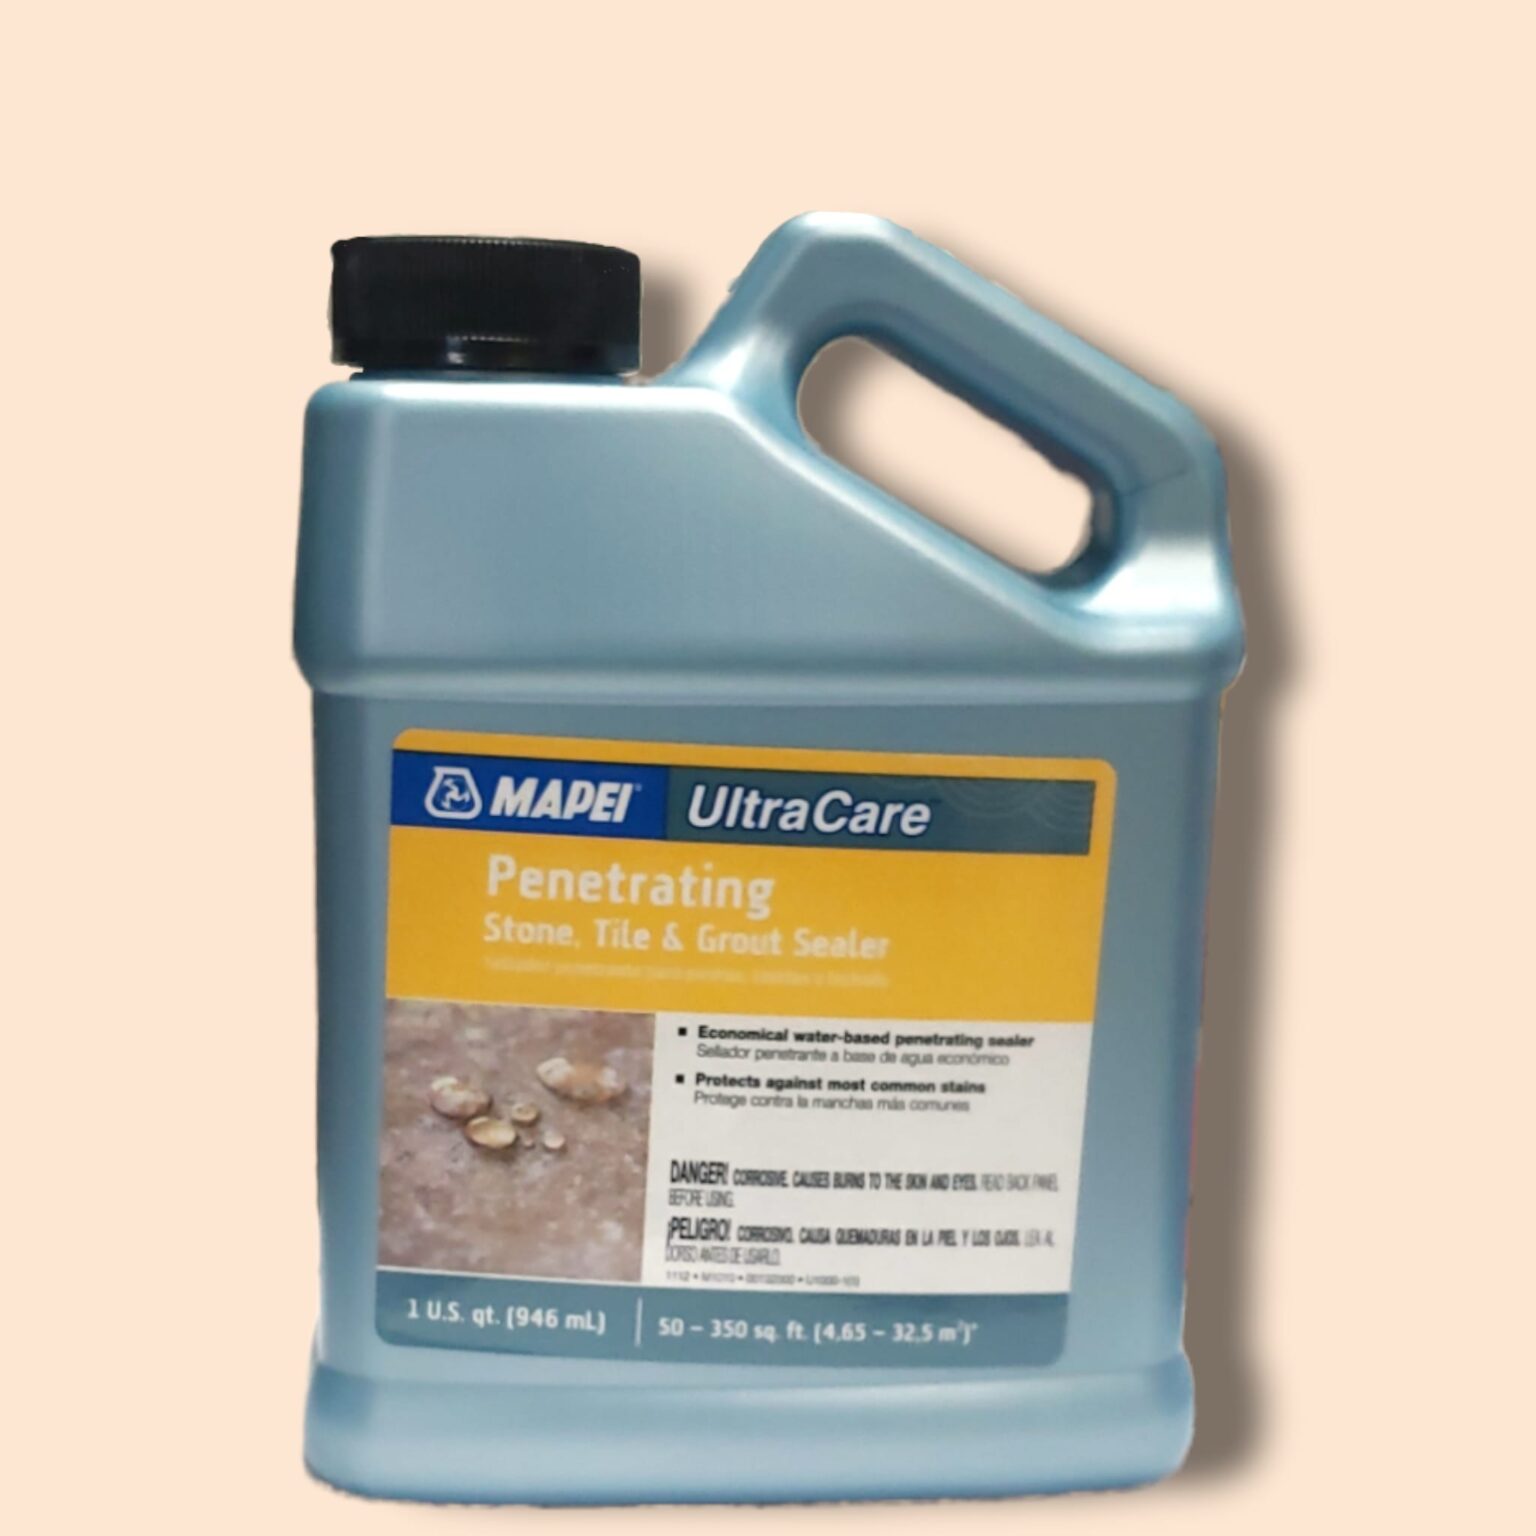 ultracare penetrating grout sealer best price